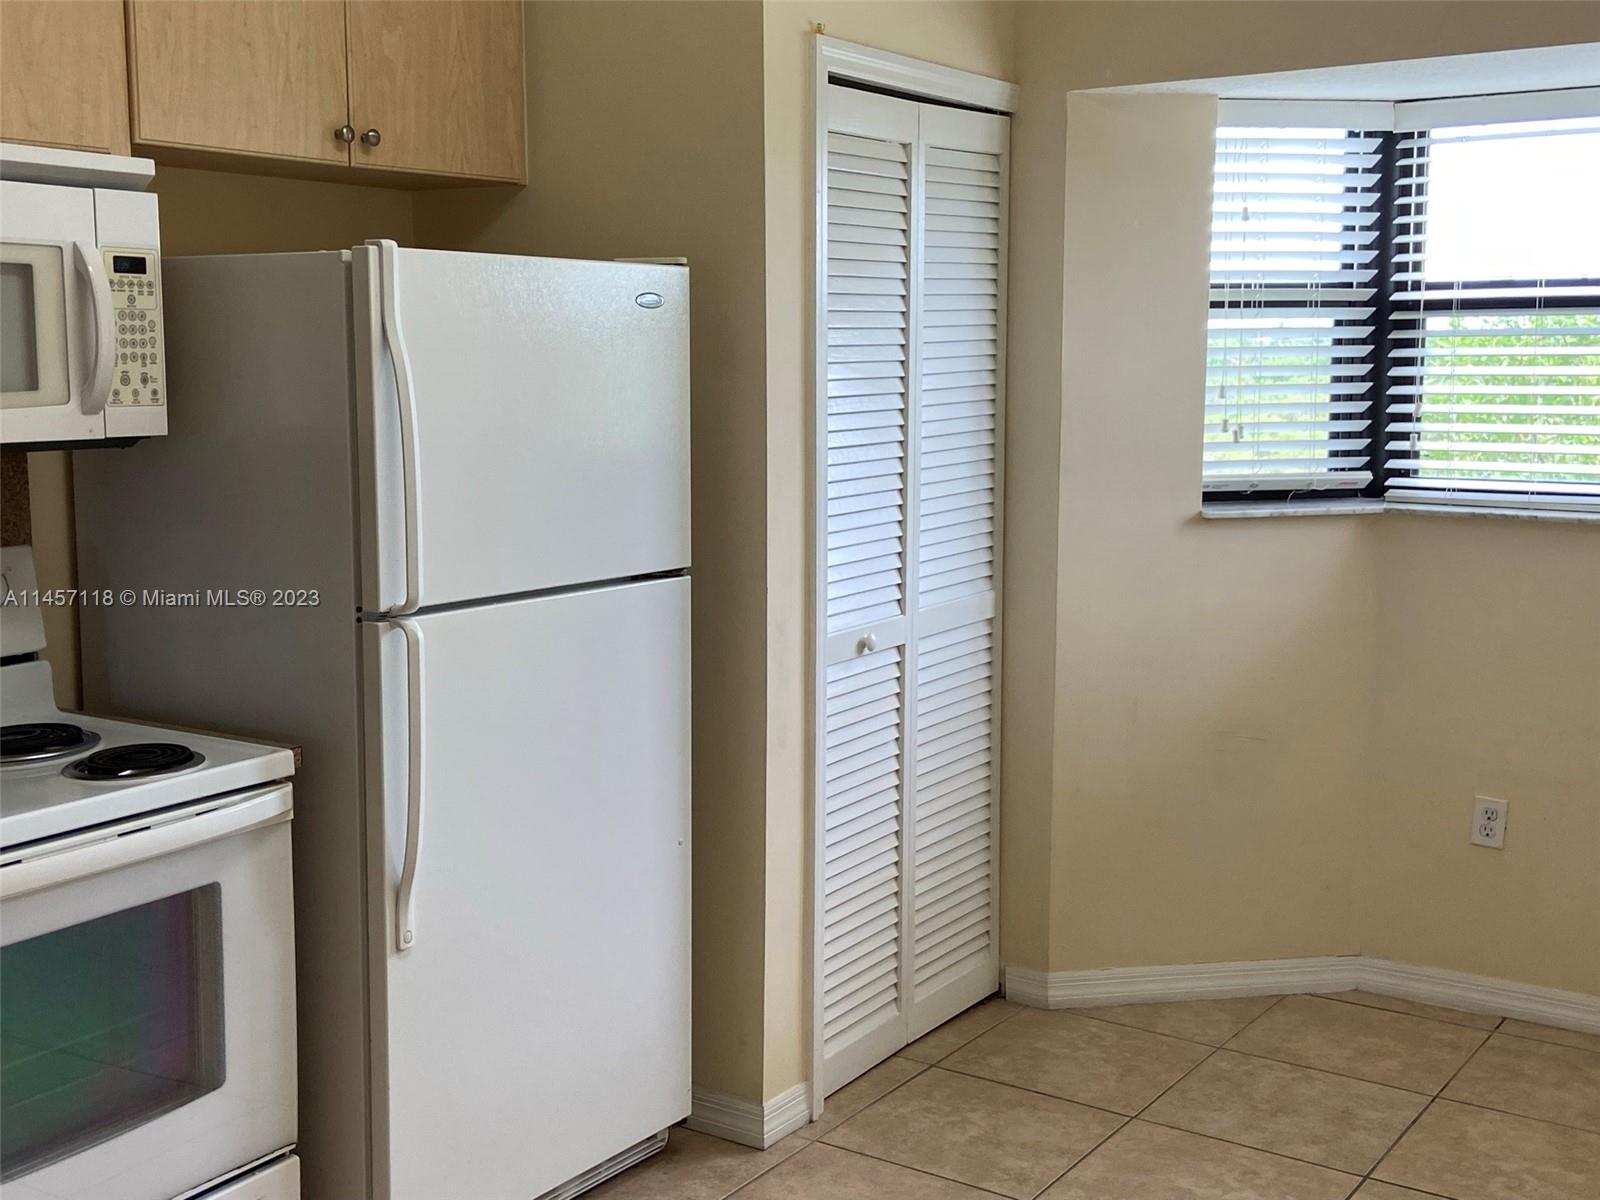 Rooms for Rent in Cutler Bay, FL